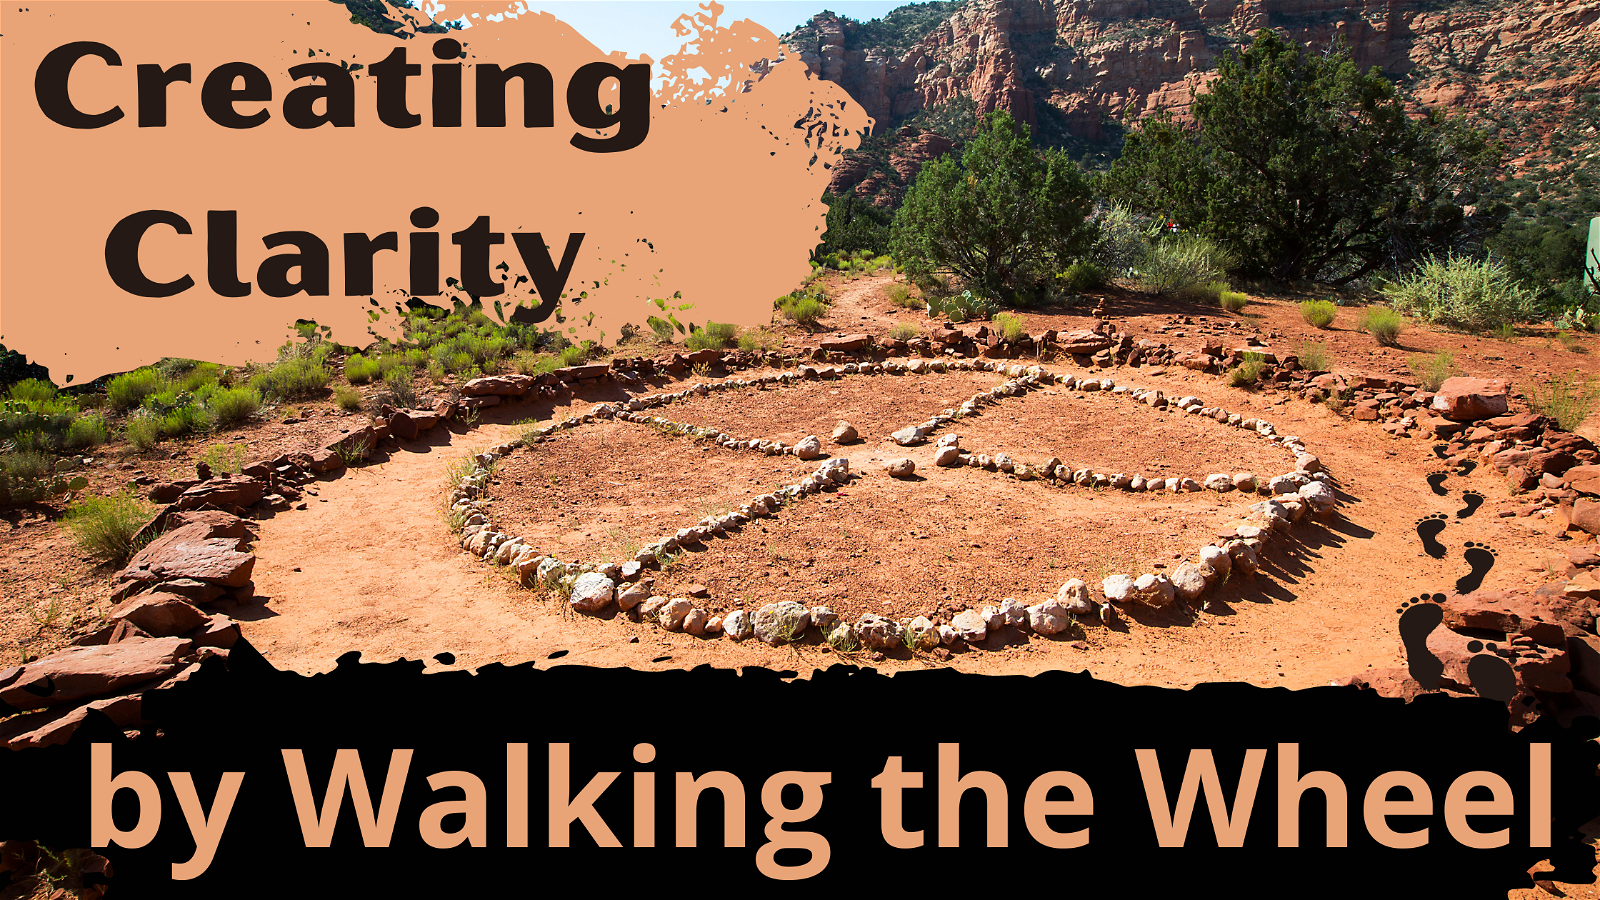 Creating Clarity by Walking the Wheel